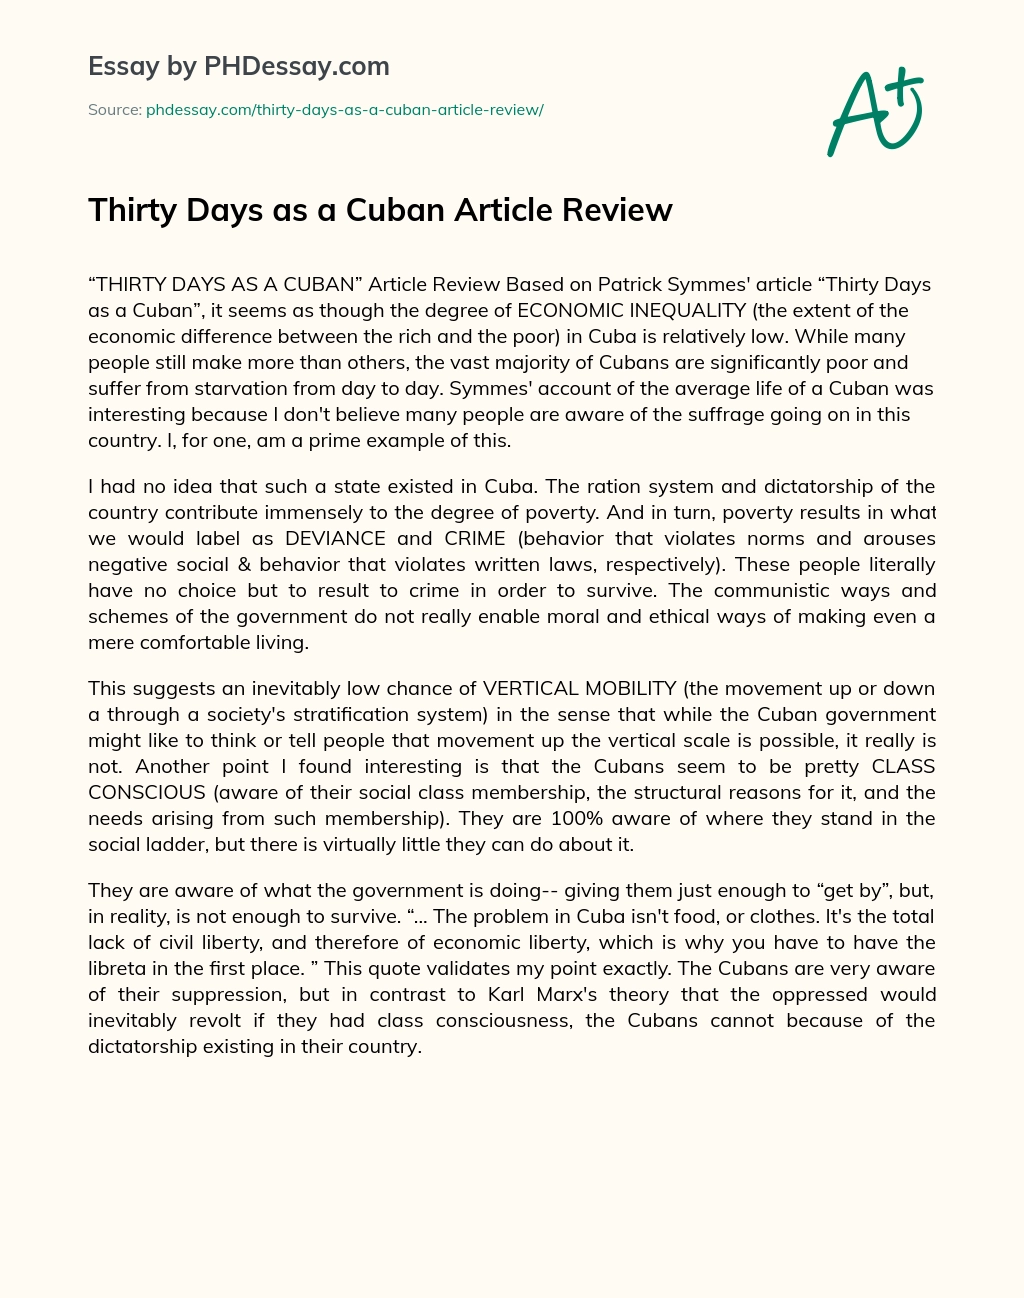 Thirty Days as a Cuban Article Review essay